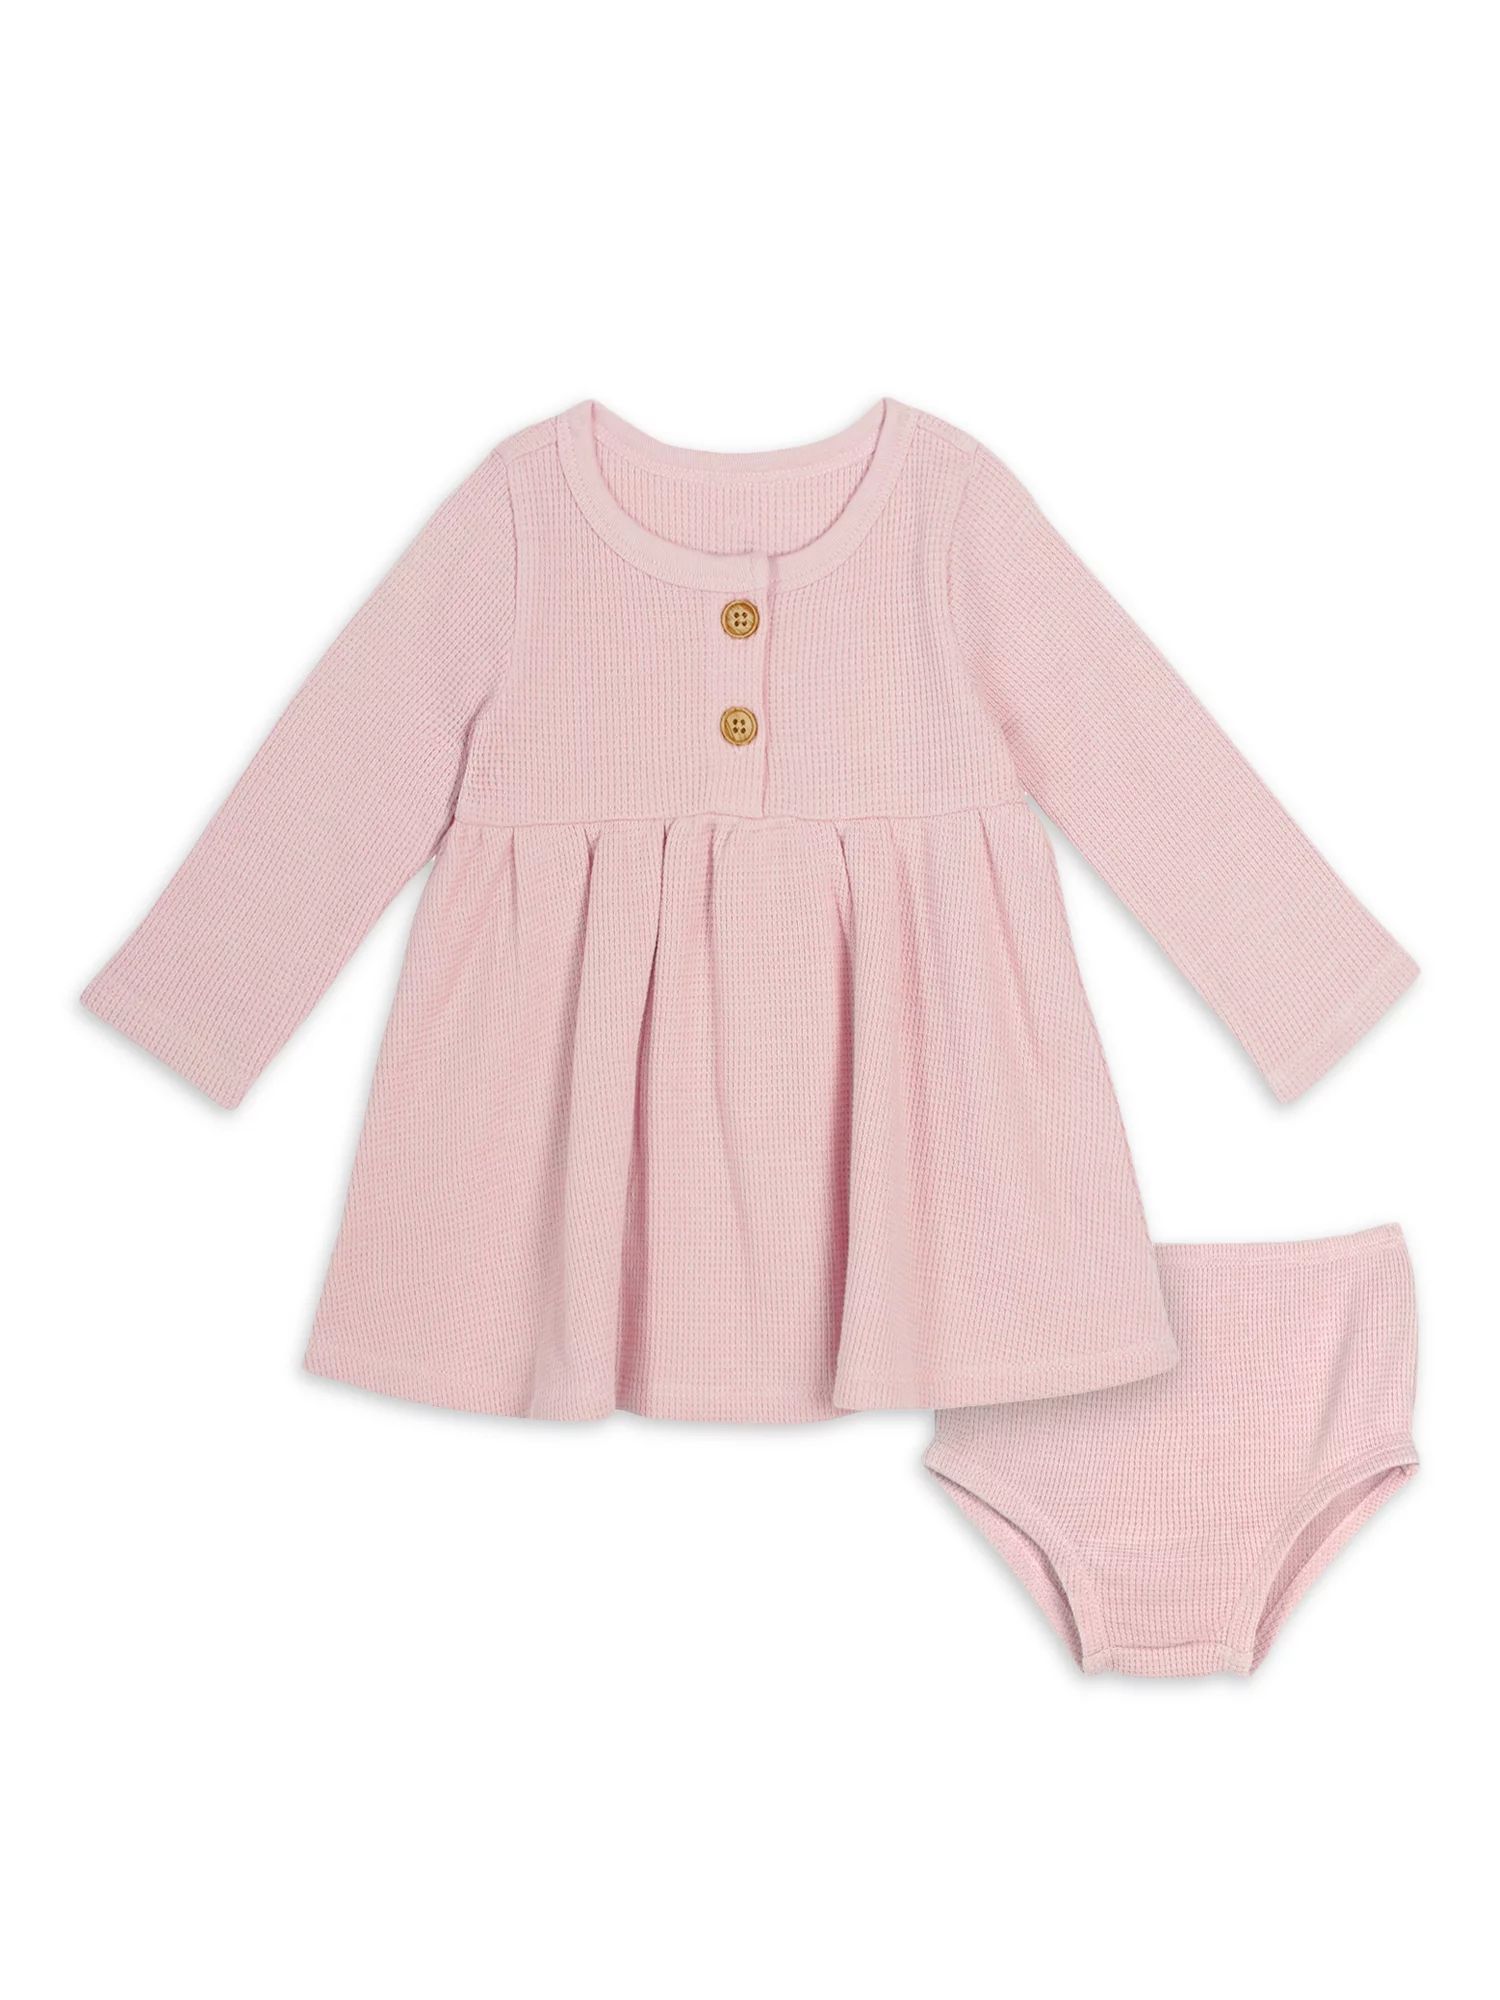 Modern Moments by Gerber Baby Girl Waffle Long Sleeve Dress & Diaper Cover Outfit Set, 2 Piece, S... | Walmart (US)